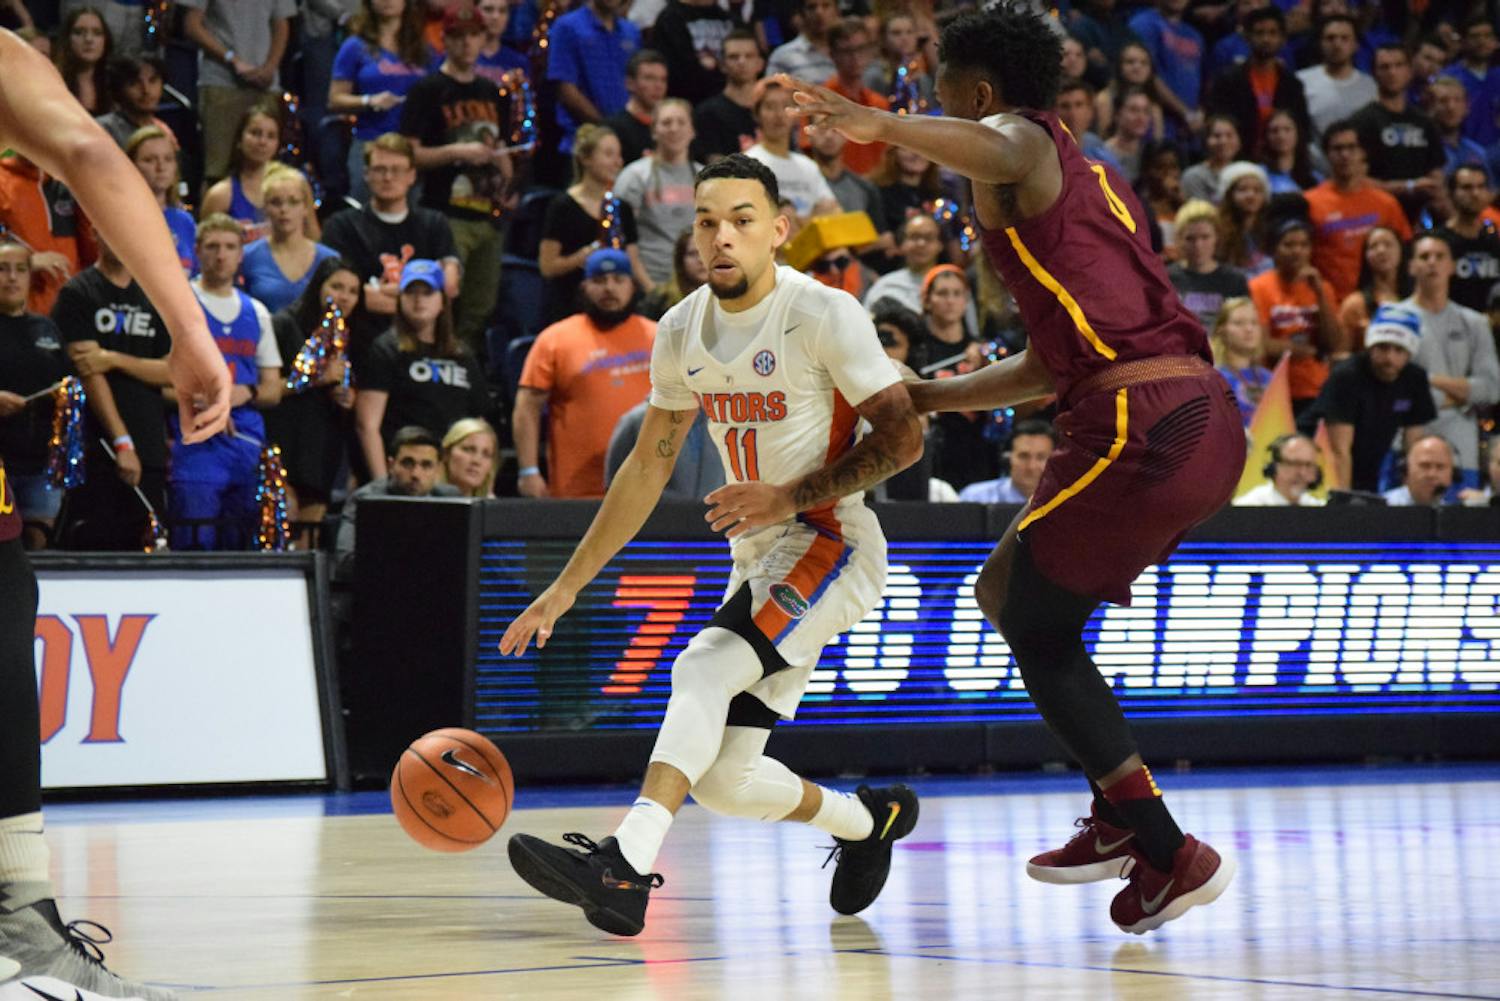 Florida guard Chris Chiozza recorded 16 points, four assists, four steals and no turnovers on Friday in UF's 75-60 win over Incarnate Word at the O'Connell Center.